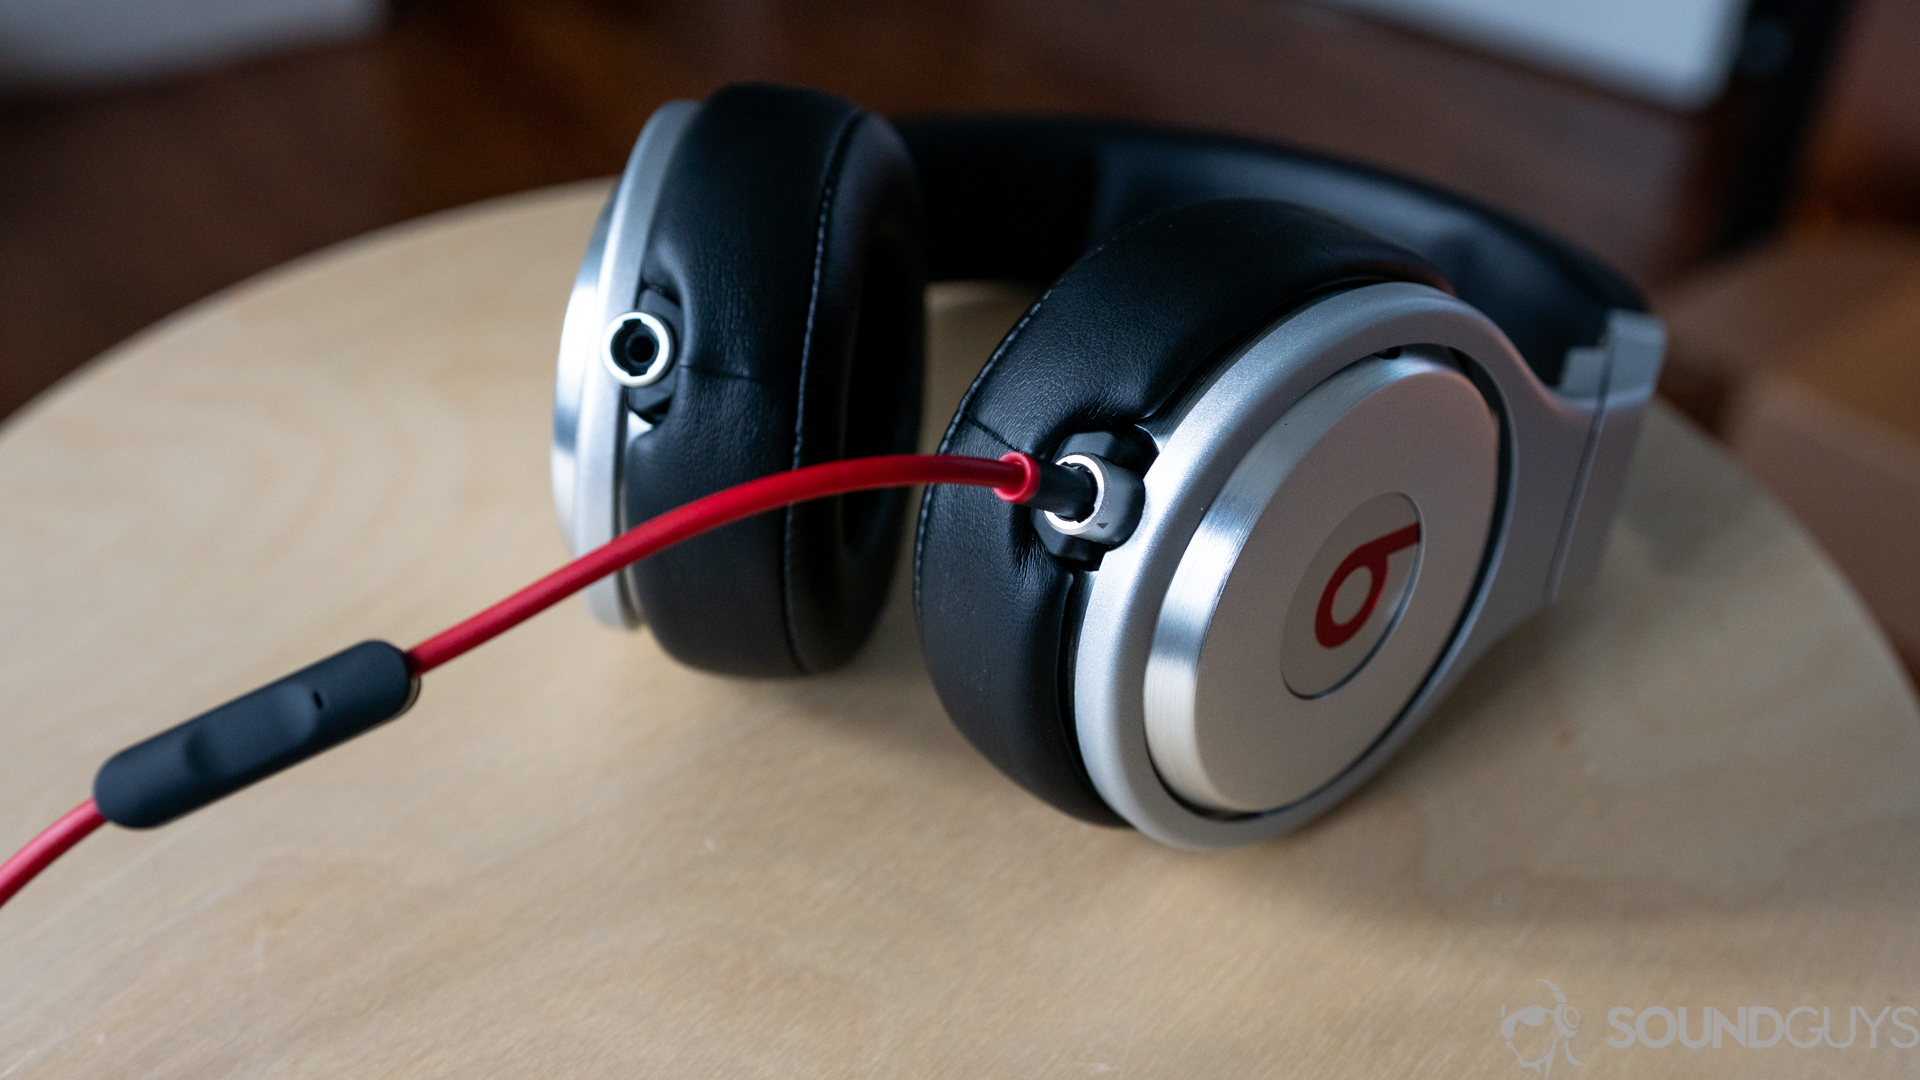 Shot of the audio cable of the Beats Pro.